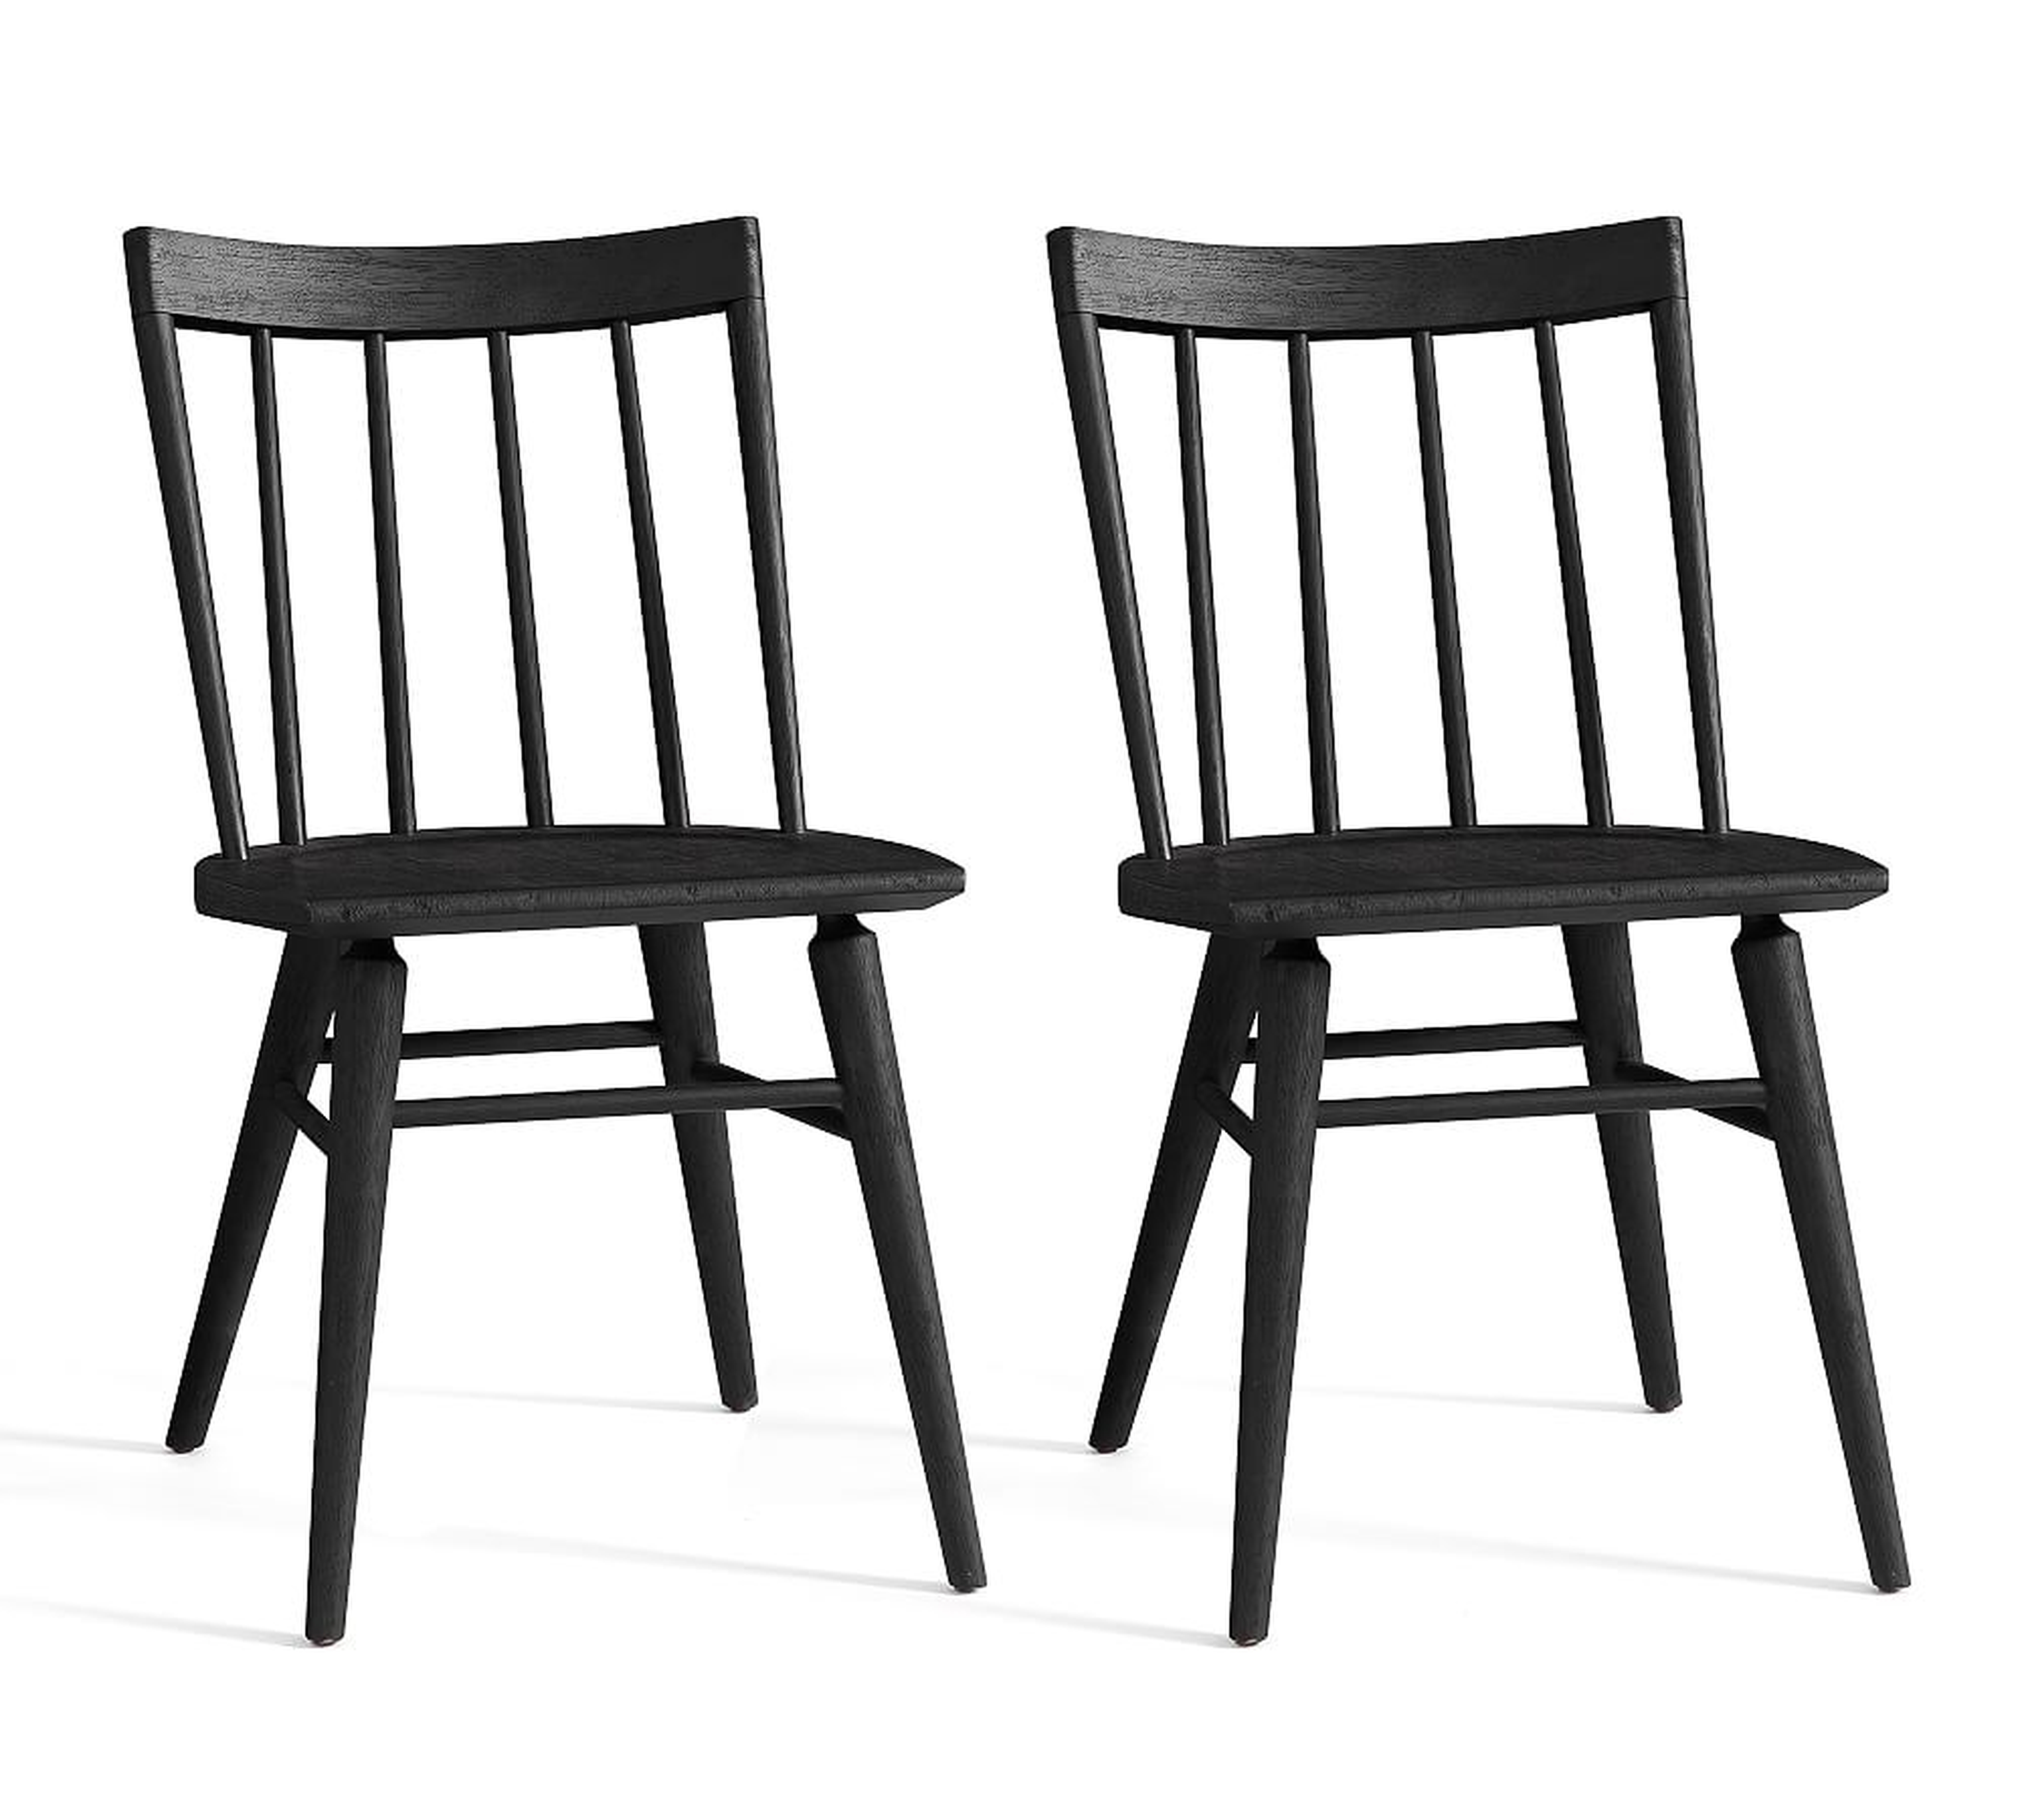 Shay Dining Chair, Black, Set of 2 - Pottery Barn